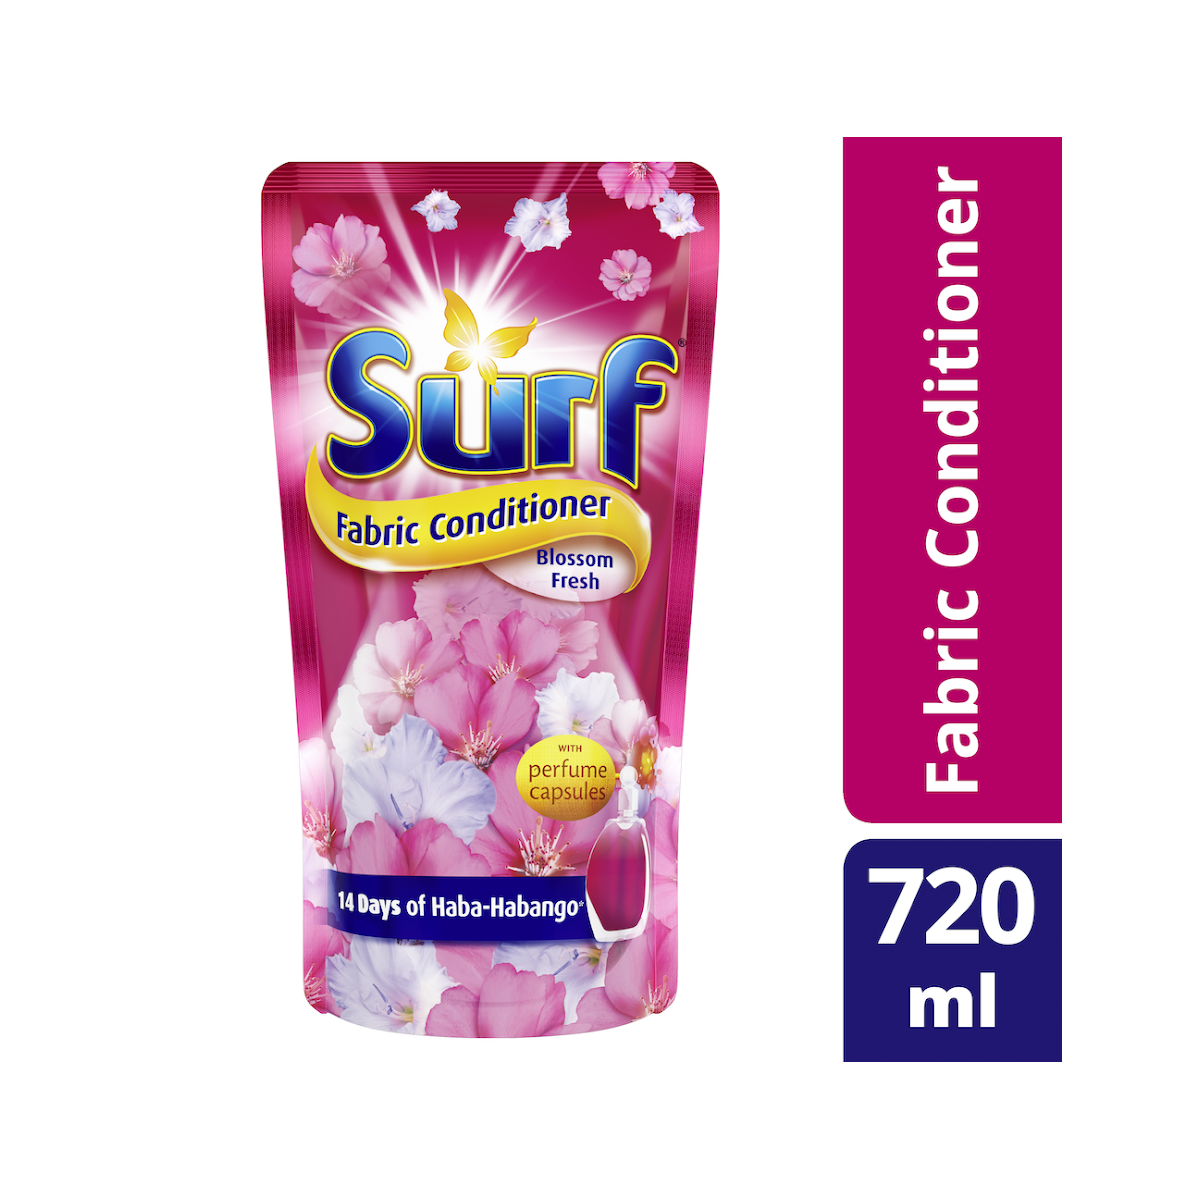 Surf Fabric Conditioner Blossom Fresh 720ML Pouch